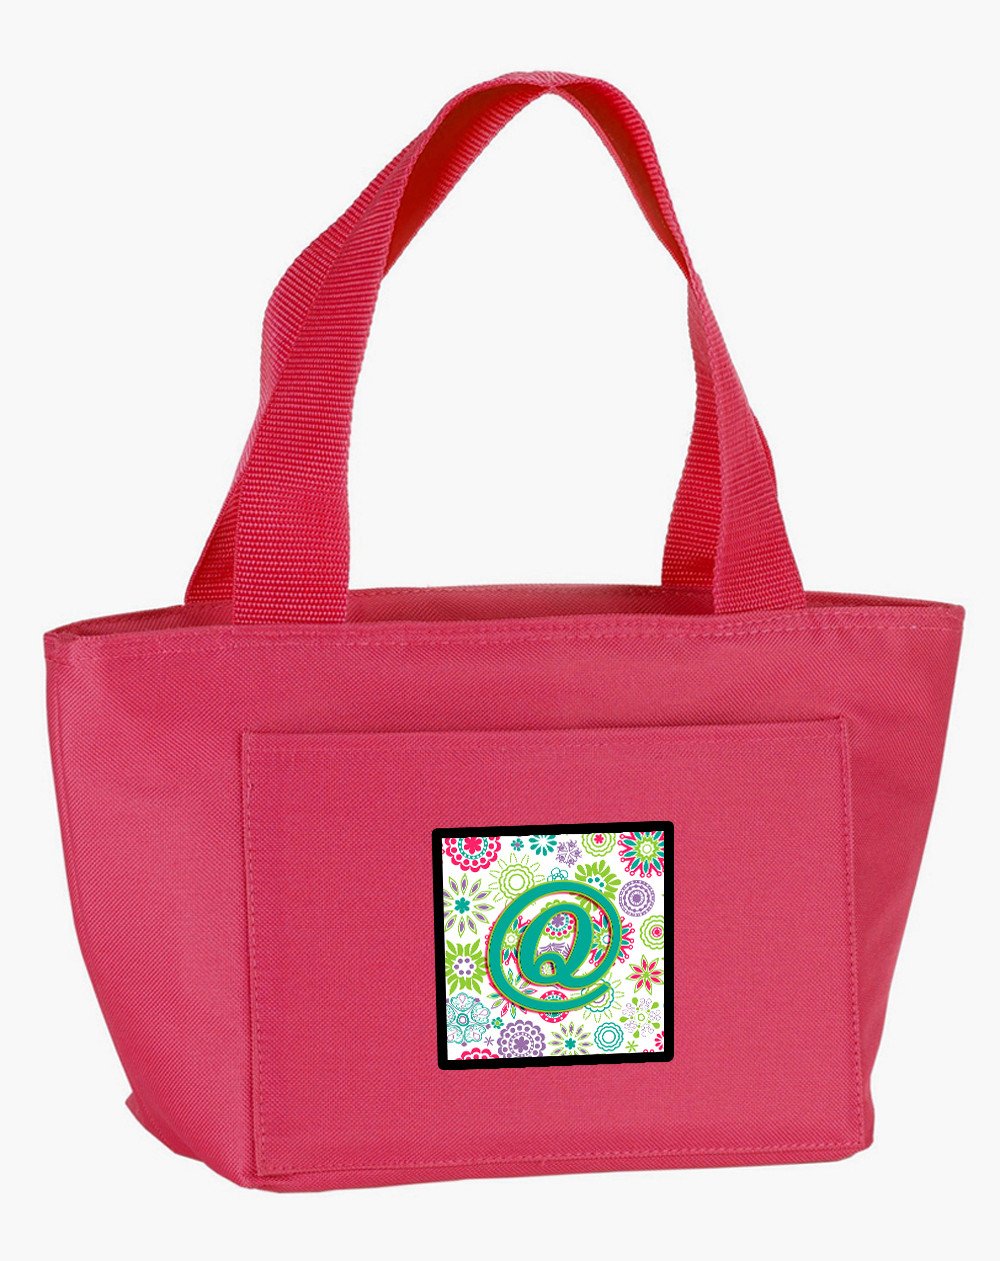 Letter Q Flowers Pink Teal Green Initial Lunch Bag CJ2011-QPK-8808 by Caroline's Treasures